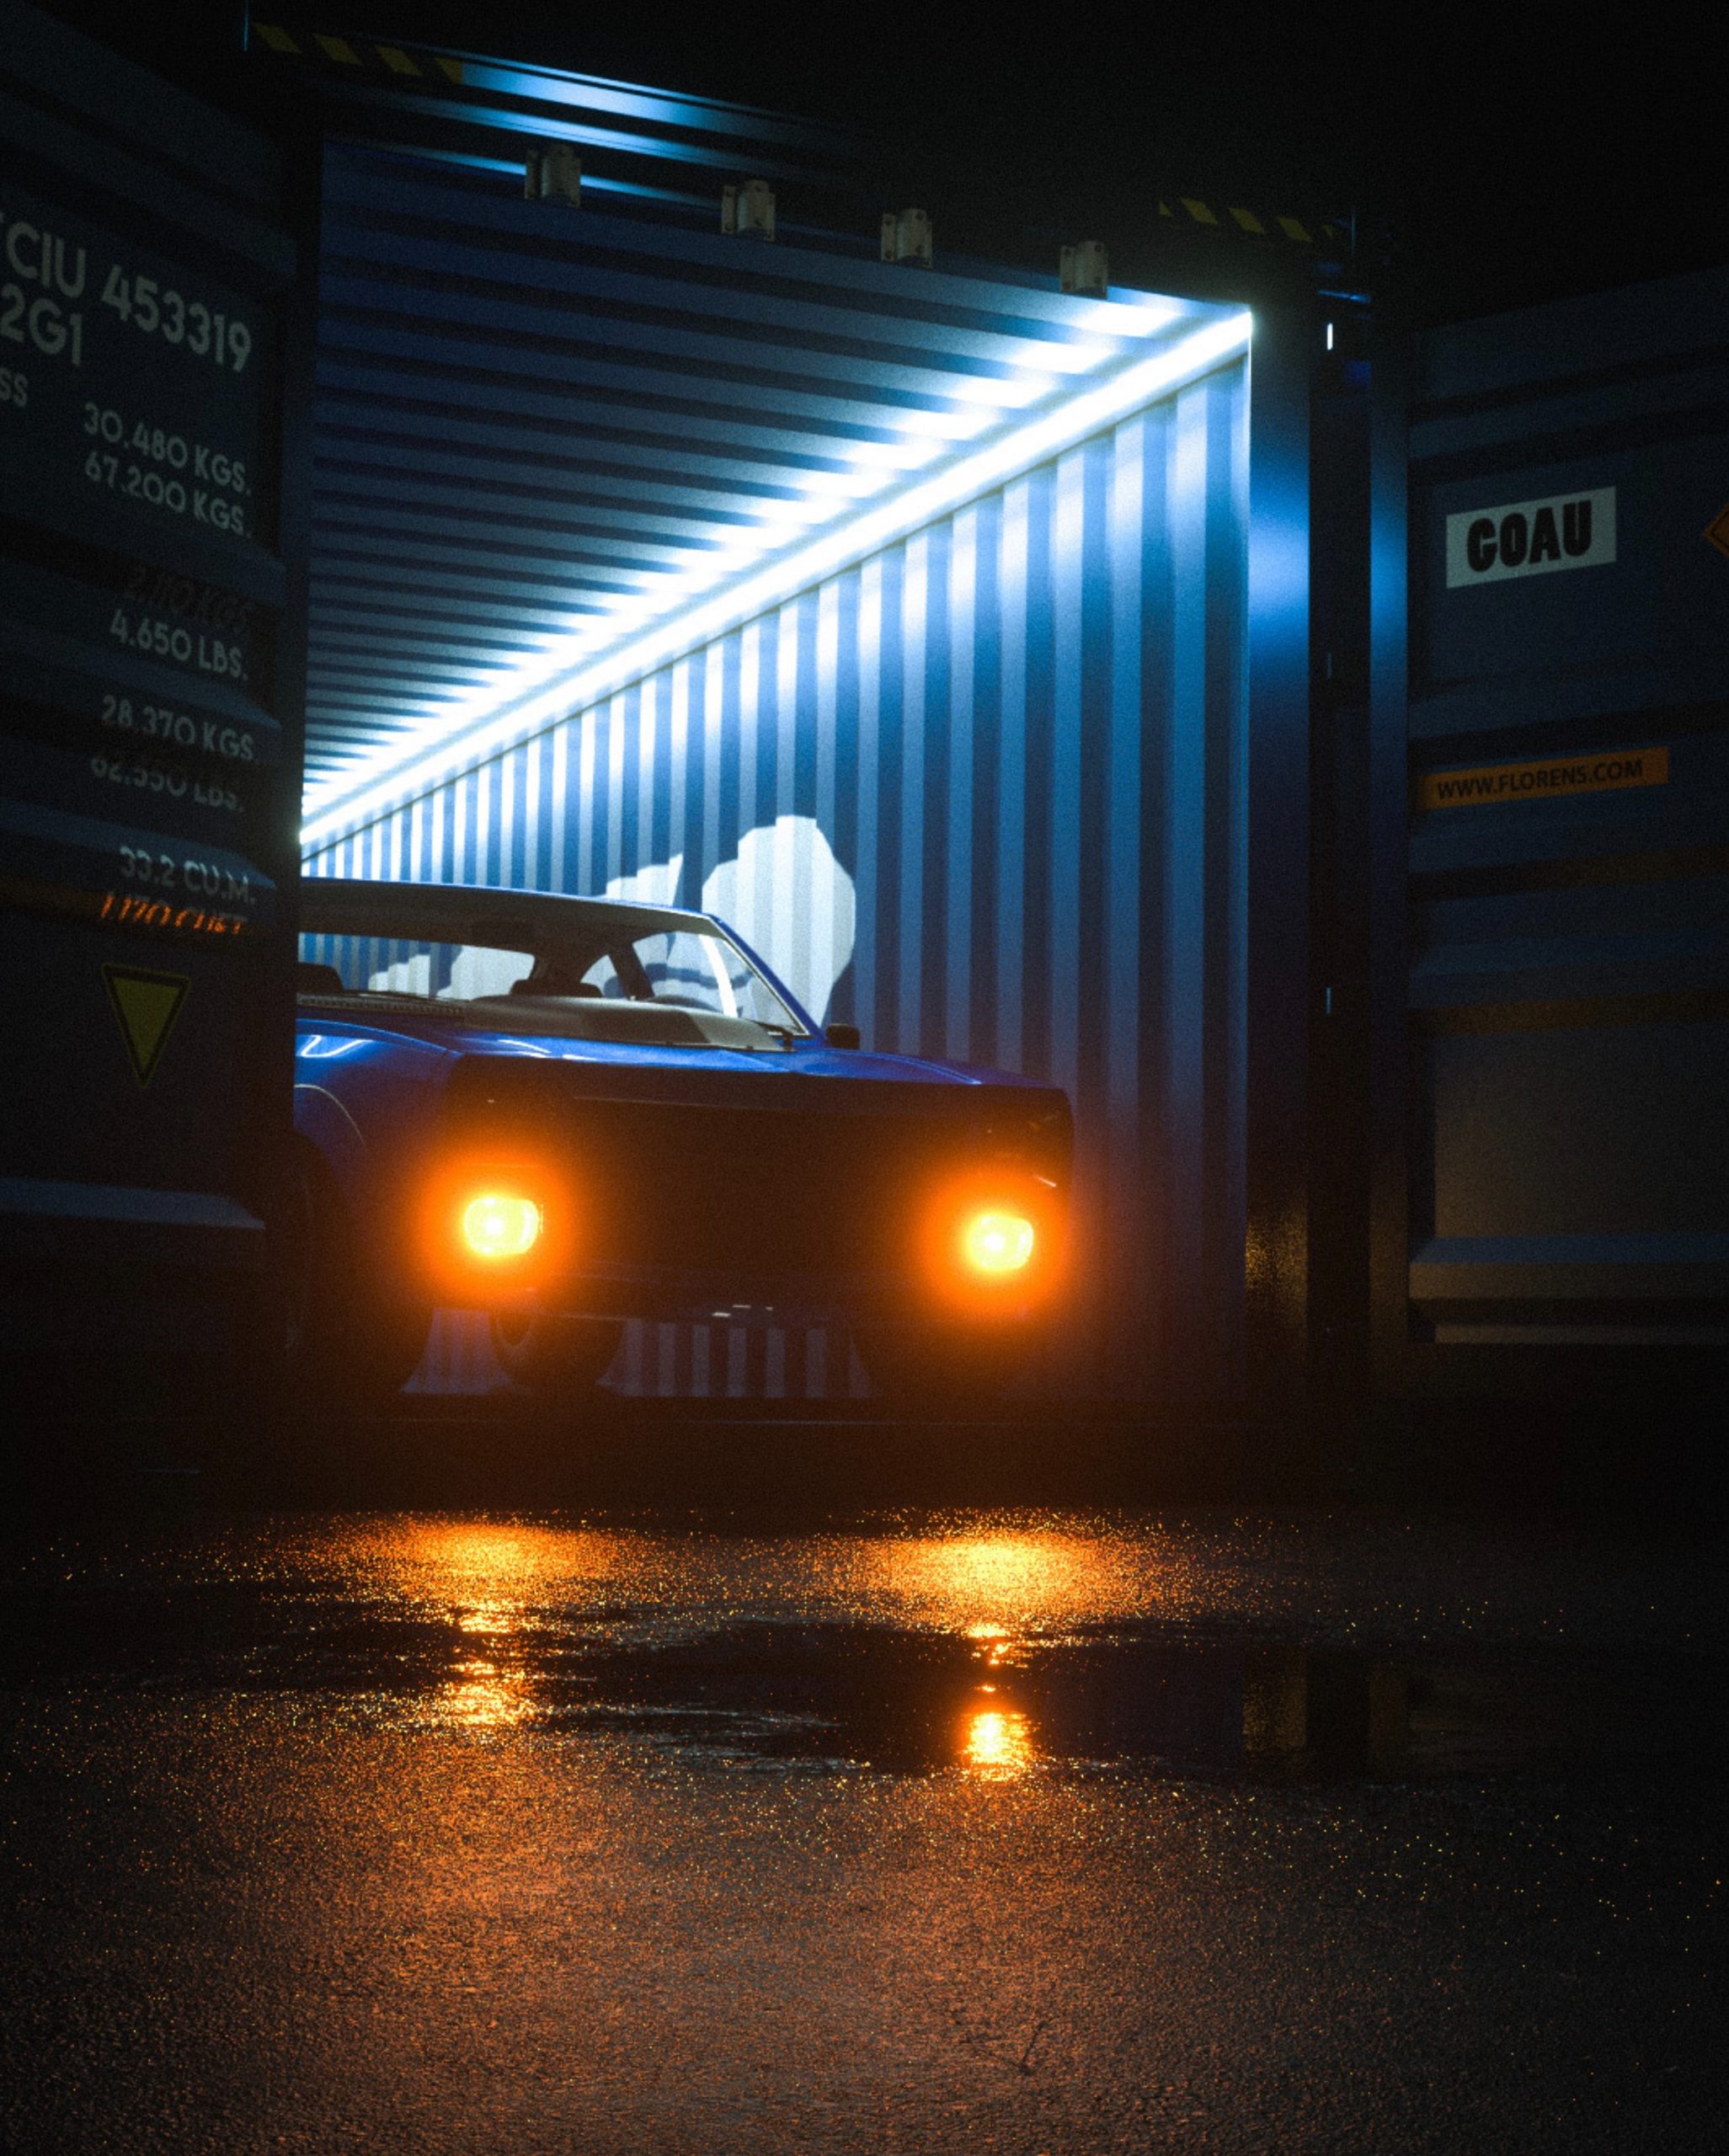 Why ship your car by container?